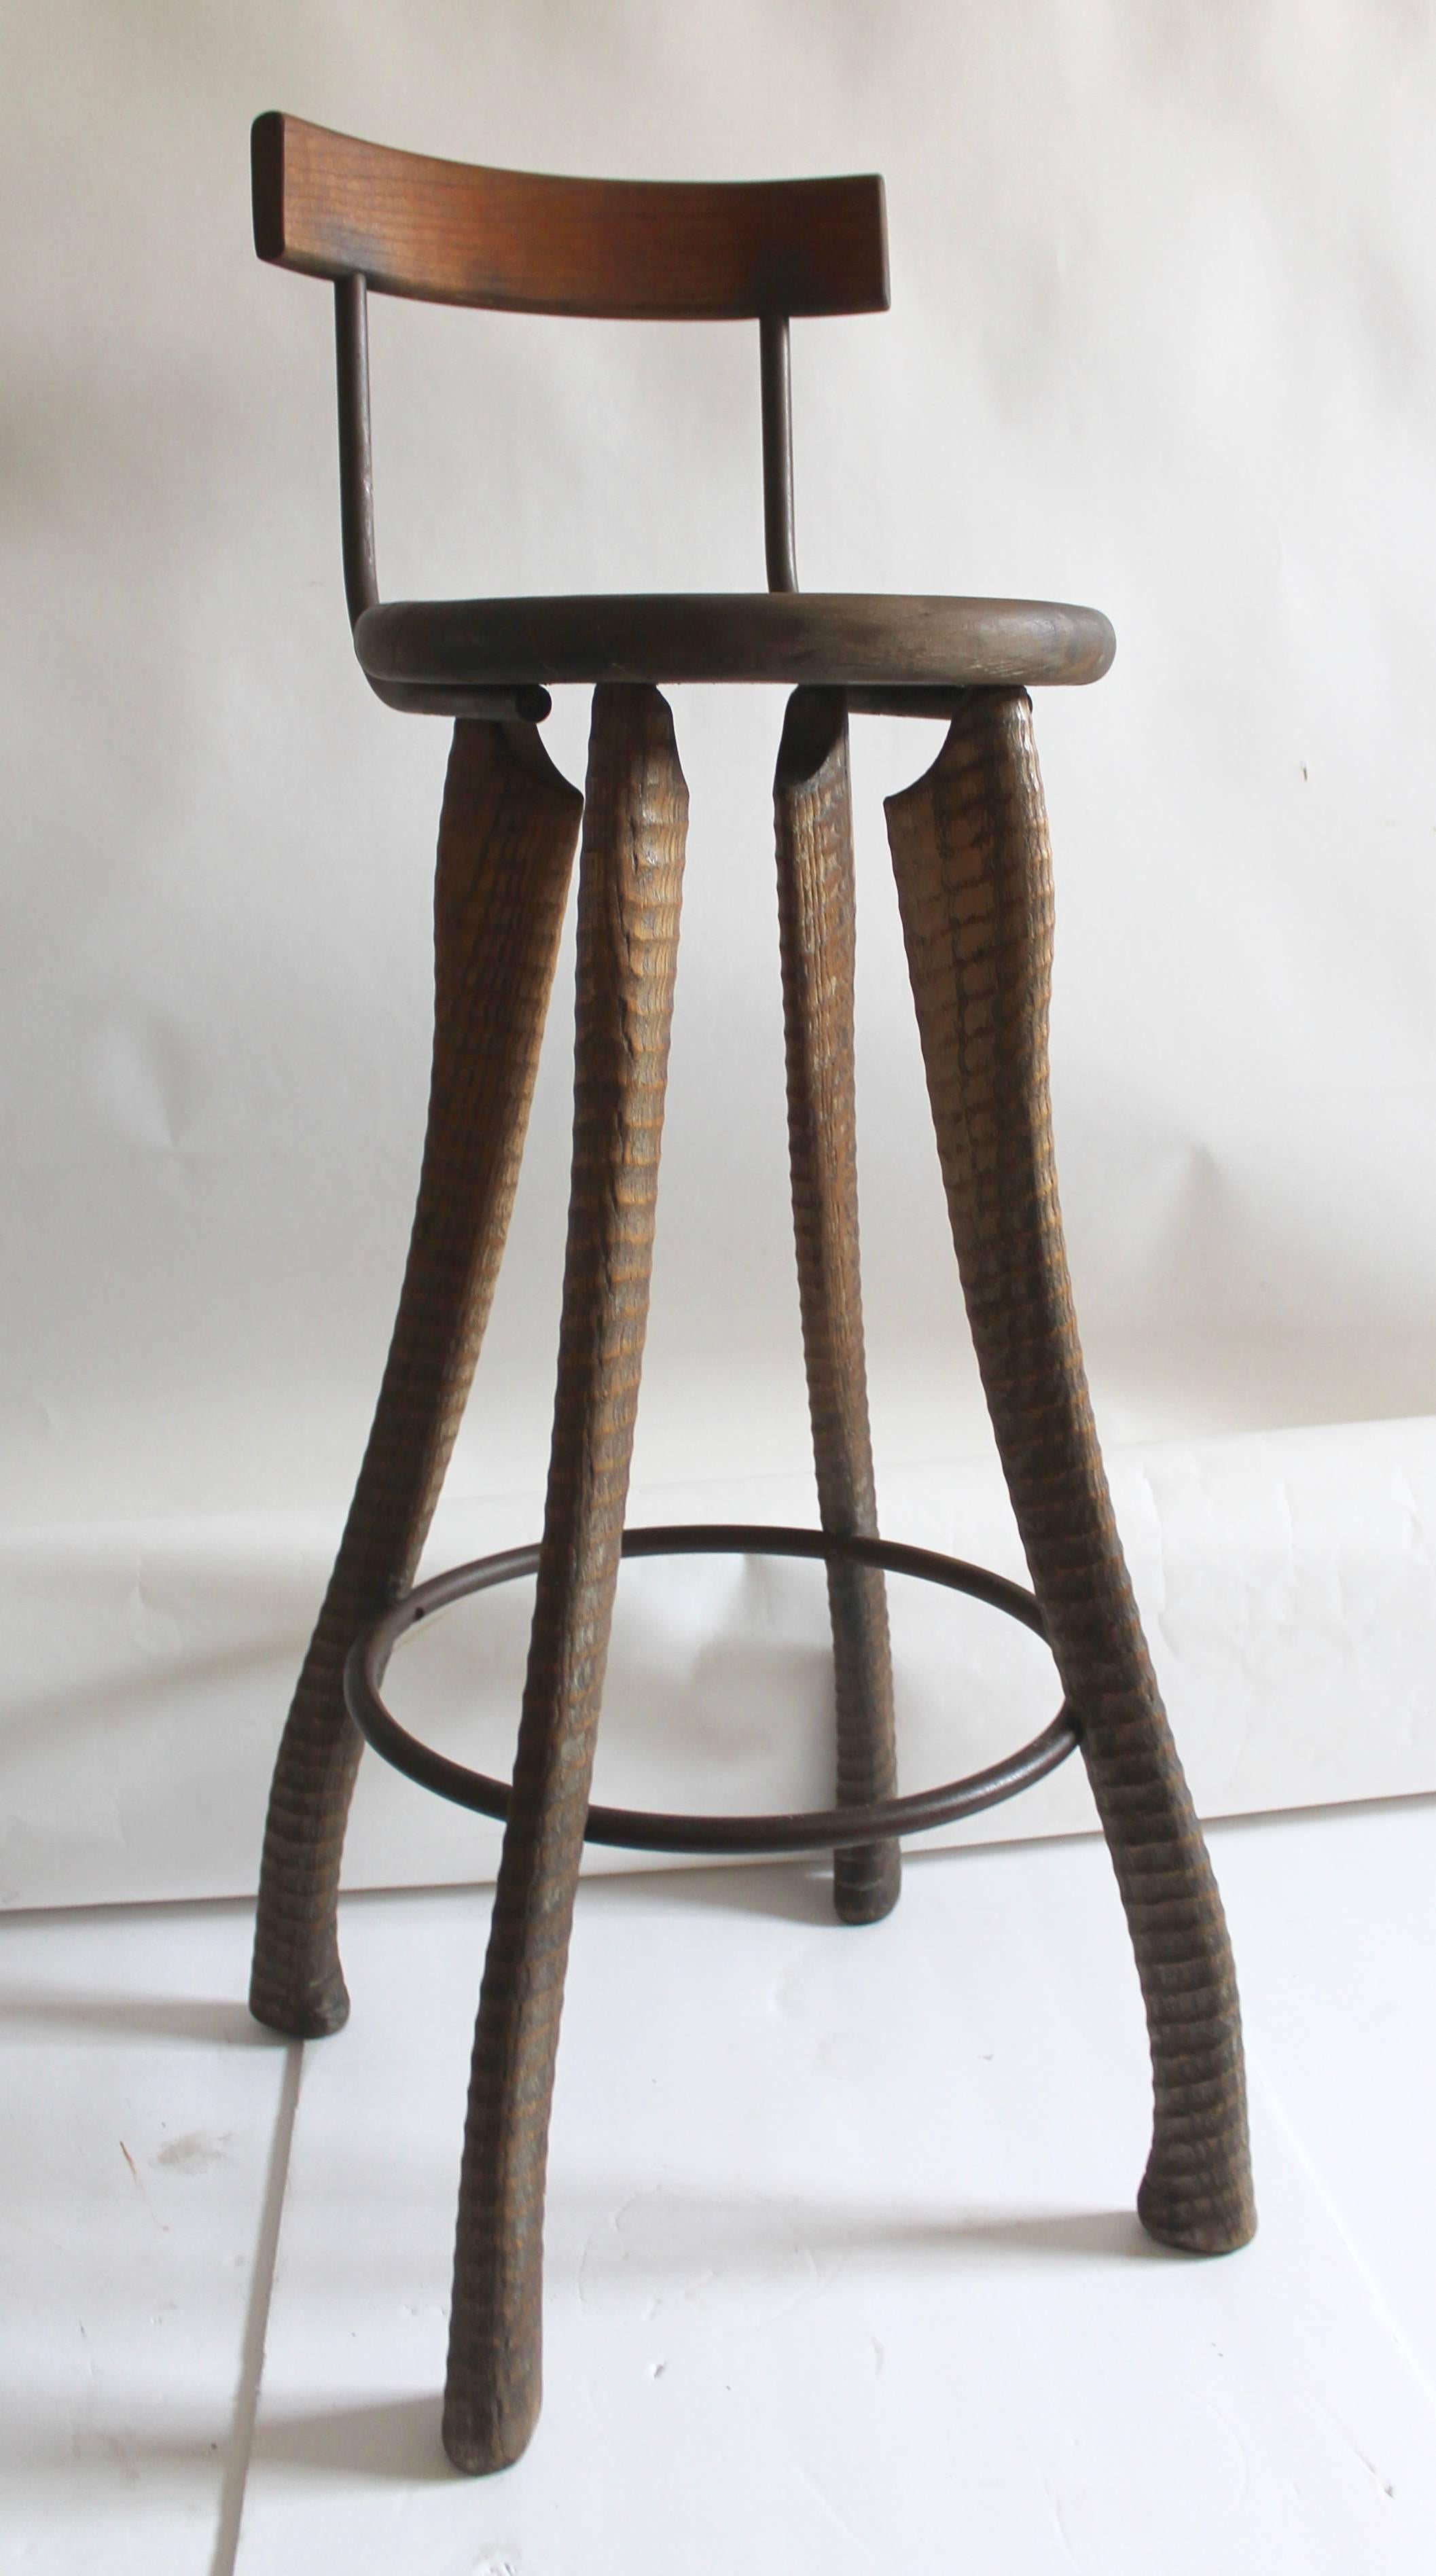 This folky handmade bar stool and all hand-carved legs. The iron footrest matches the iron rungs on the back of the seat attached. Take special notice to the details in the hand-carved legs. The condition is very good and comfortable.